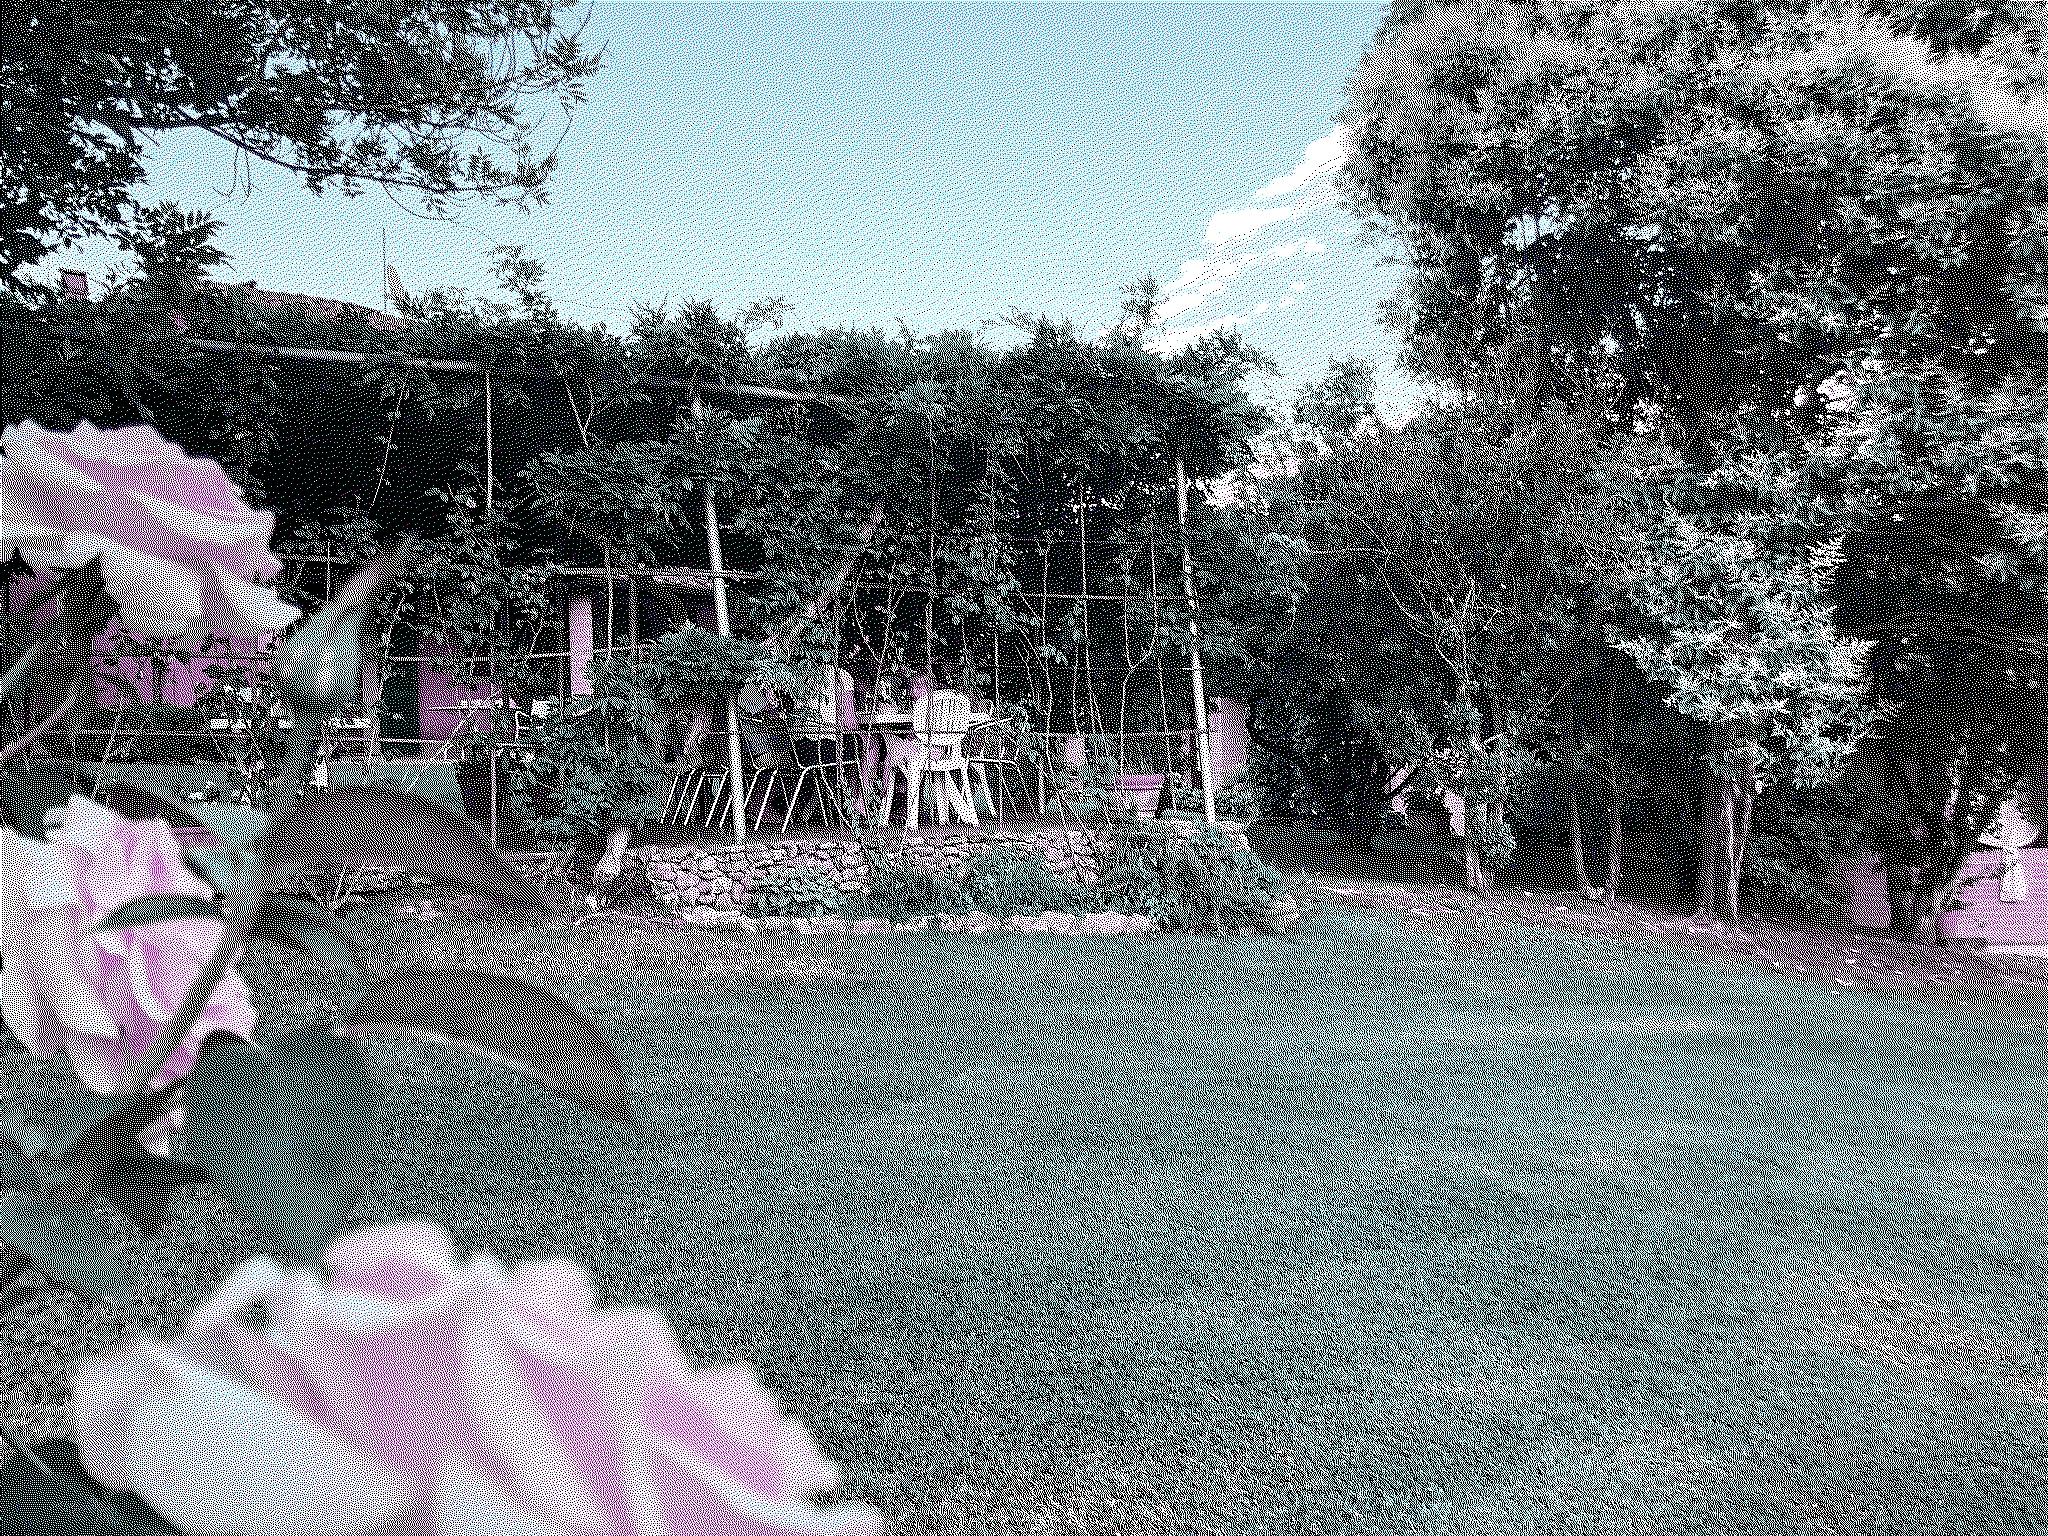 A dithered image with four colors. A rose bush on a field in foreground with a pergola in the background.